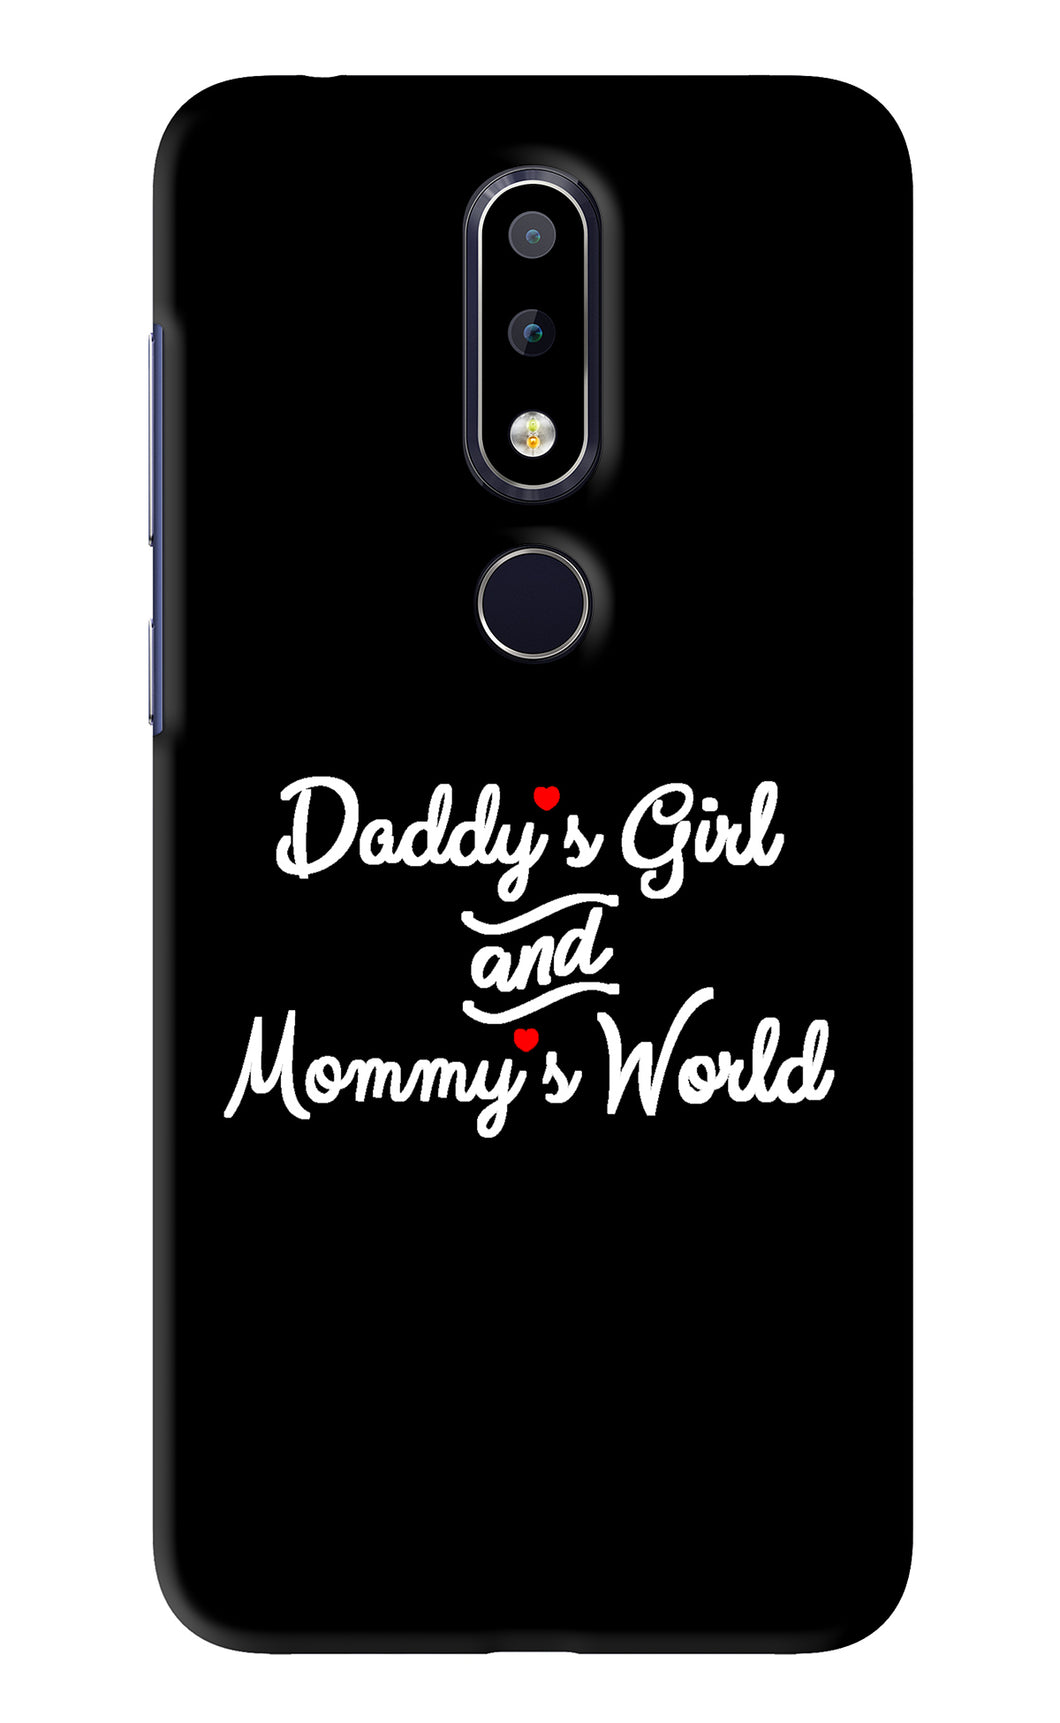 Daddy's Girl and Mommy's World Nokia 6 2017 Back Skin Wrap